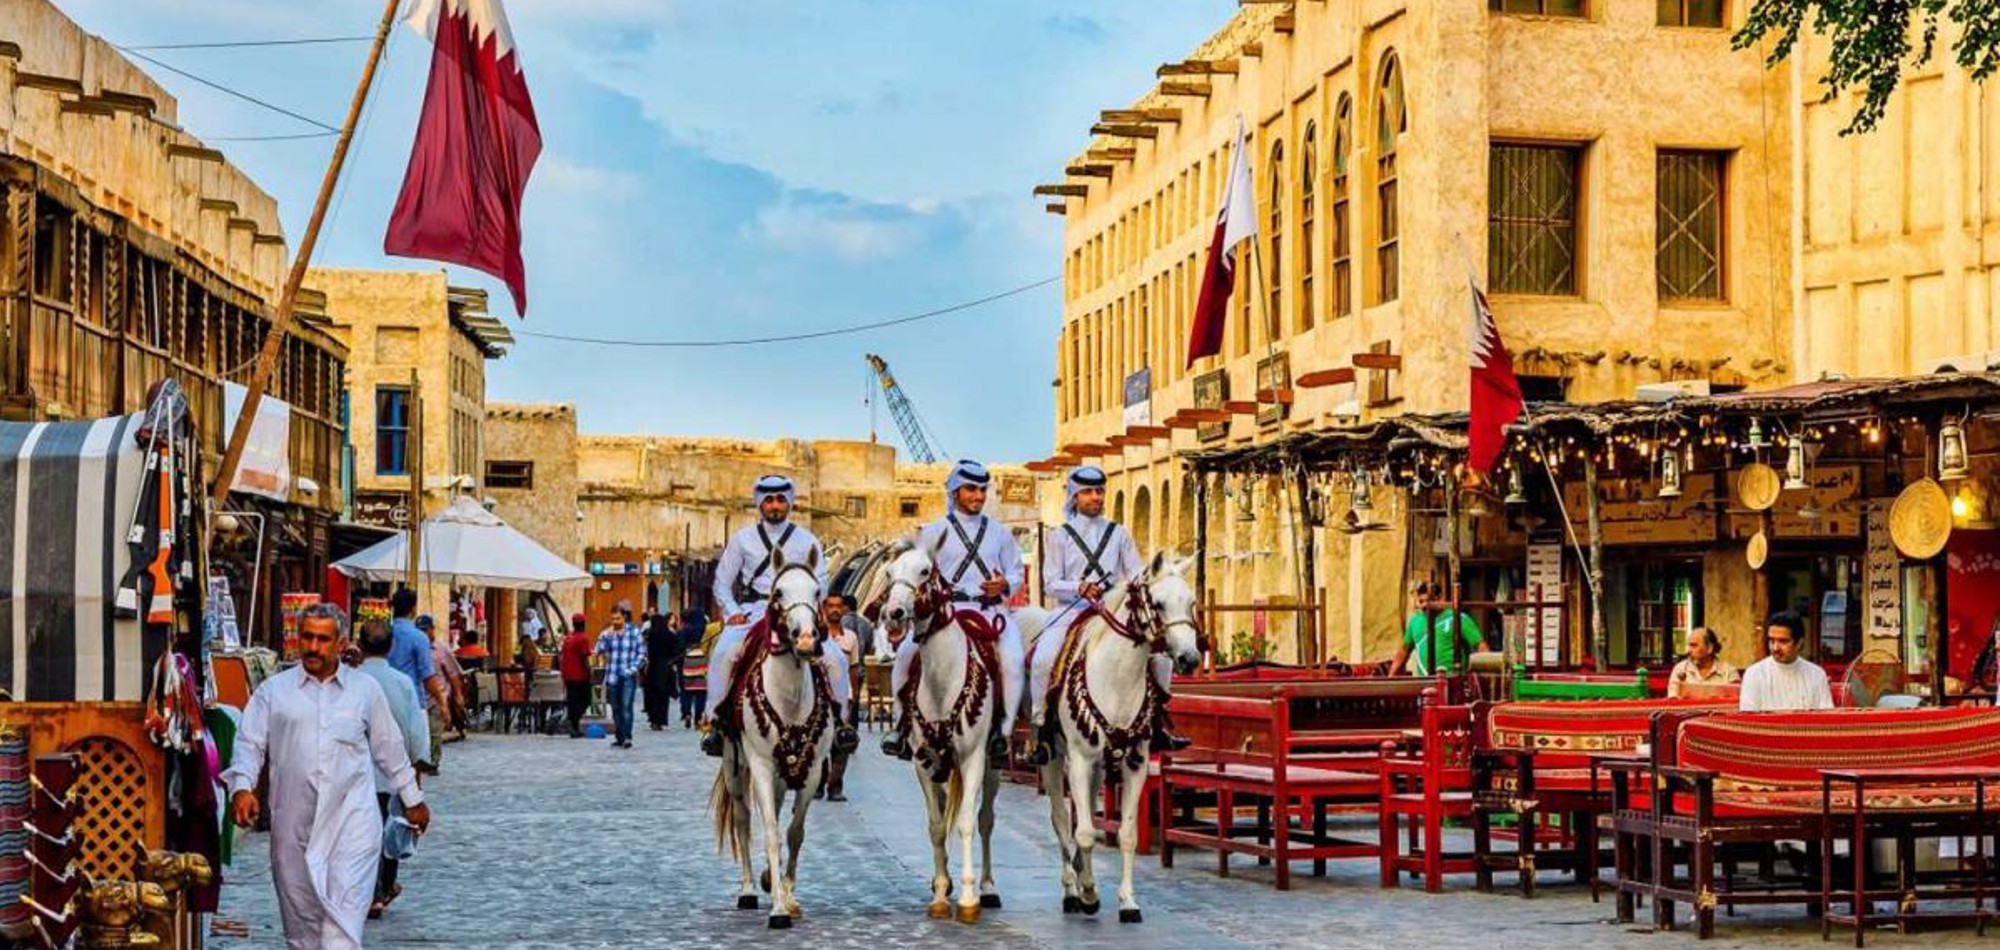 FIFA publishes tourist guide to cities, landmarks and activities in Qatar